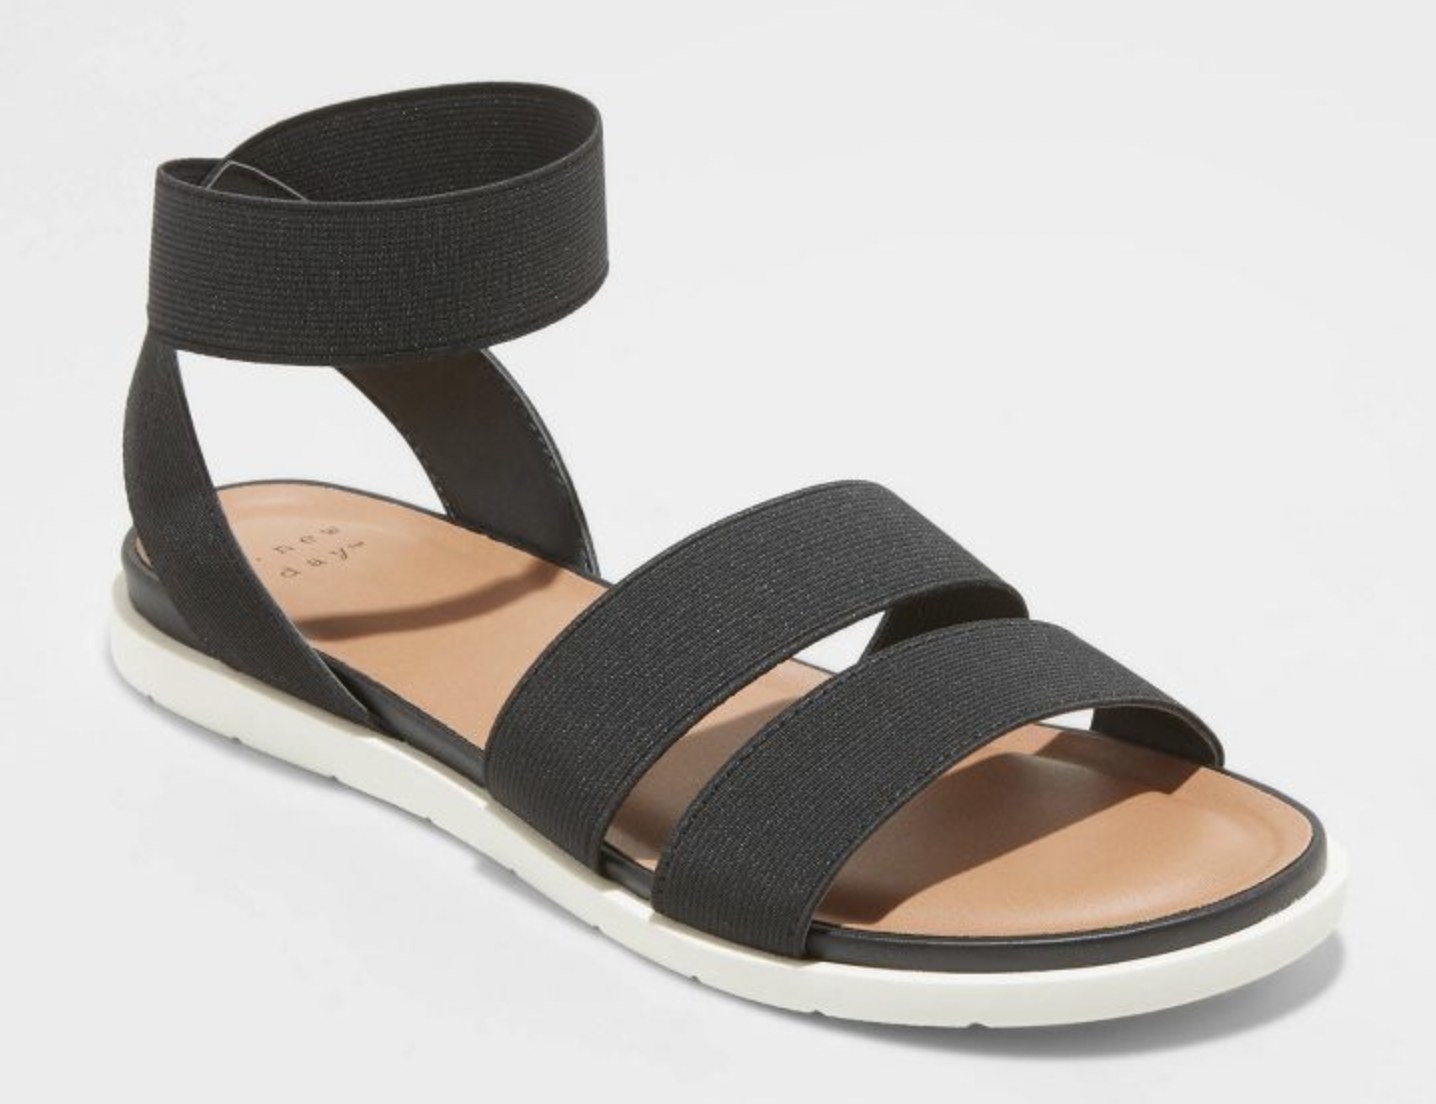 side view of the sandal in black